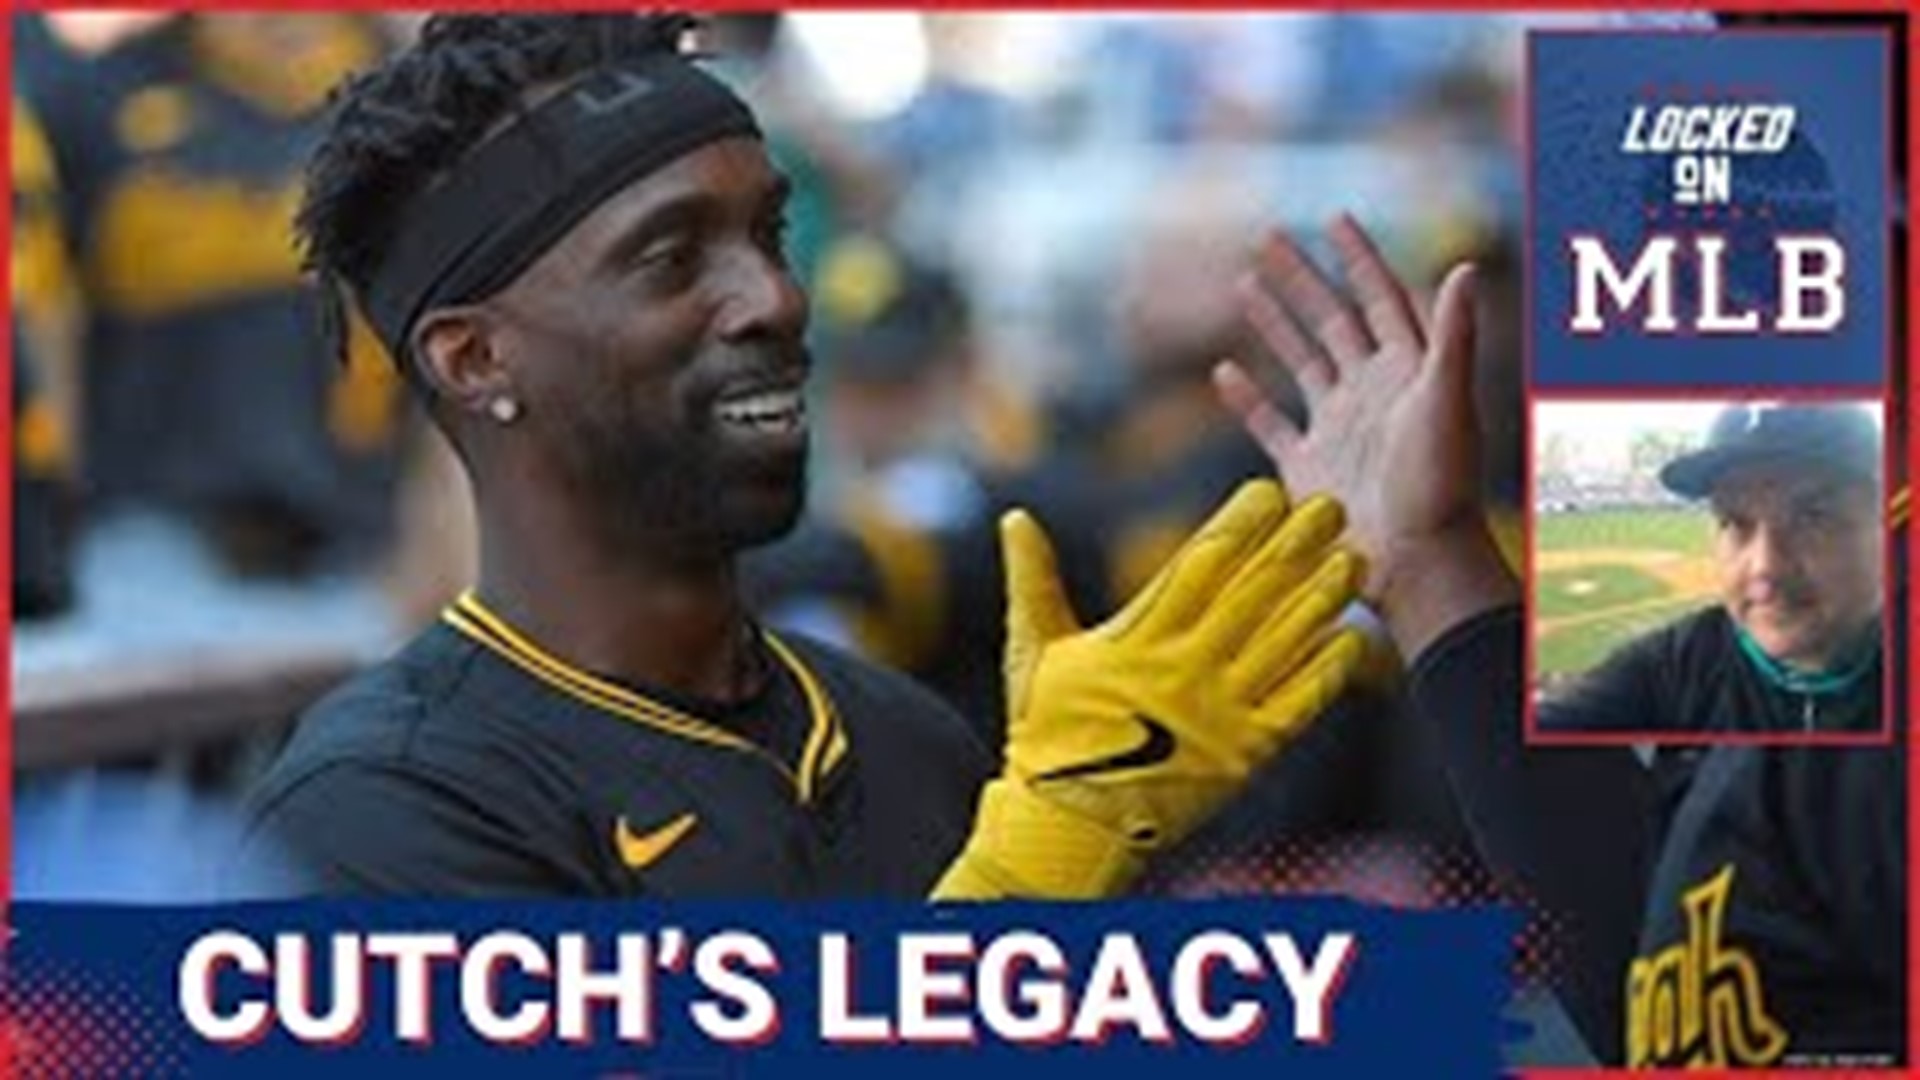 Andrew McCutchen helped the Pirates win again and has joined an elite group of players with his accomplishments during his wonderful career.